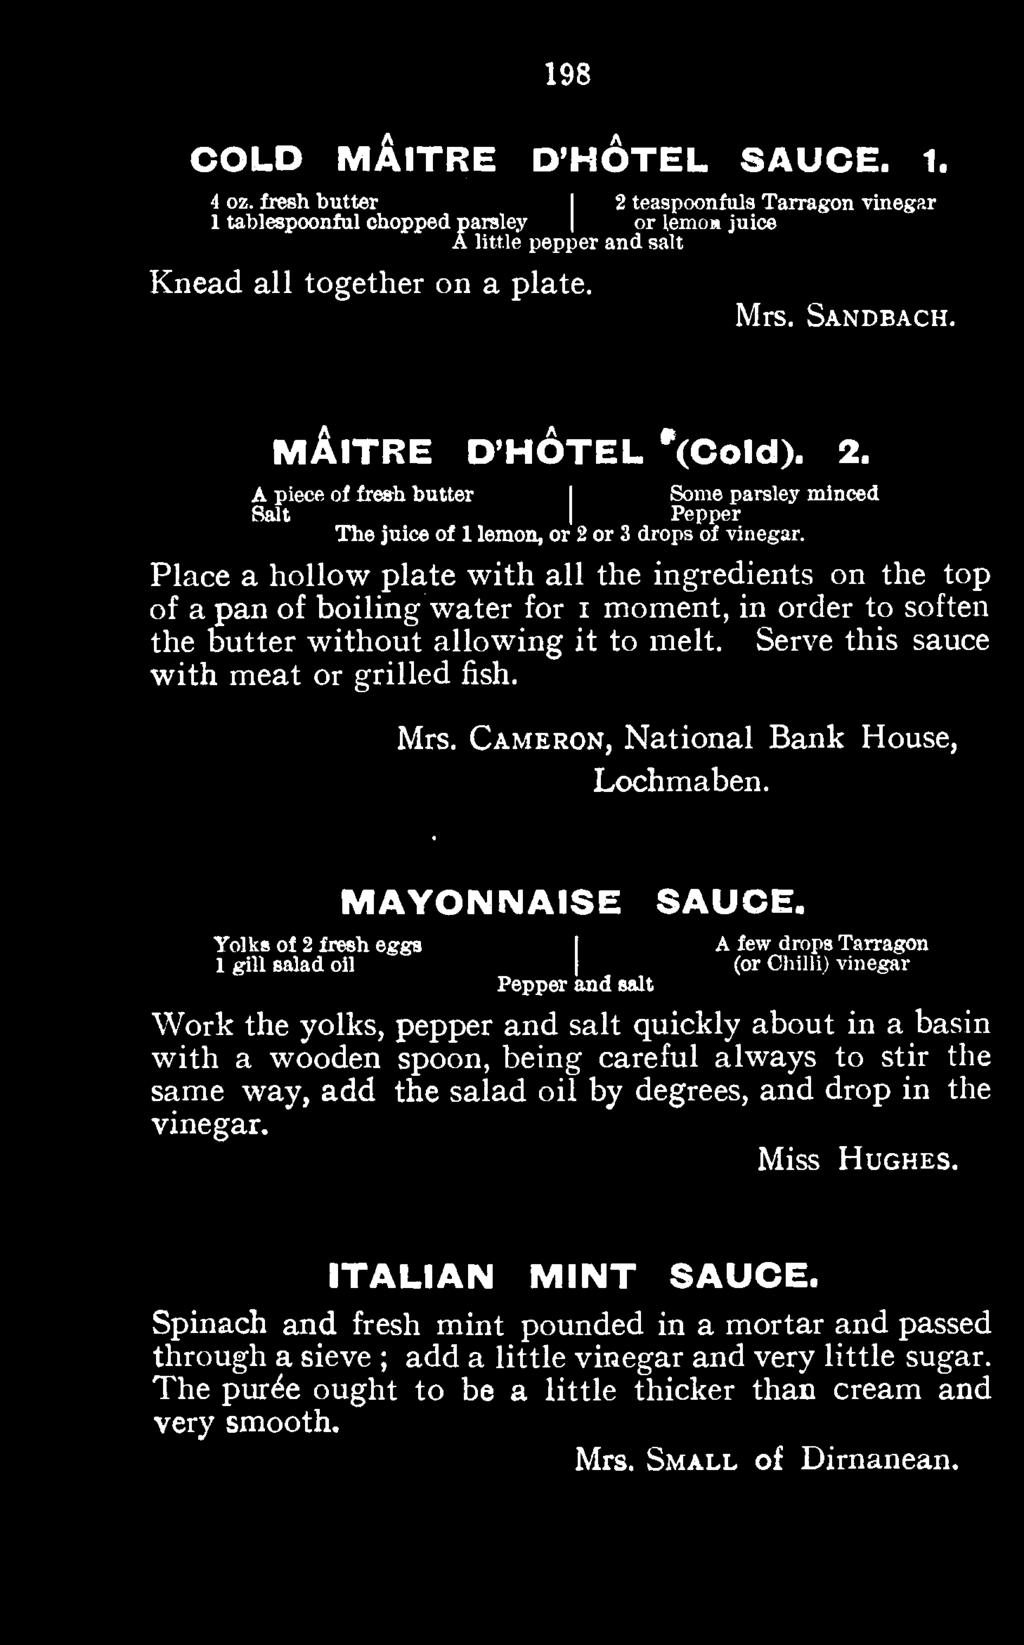 Serve this sauce with meat or grilled fish. Mrs. Cameron, National Bank House, Lochmaben. MAYONNAISE SAUCE.